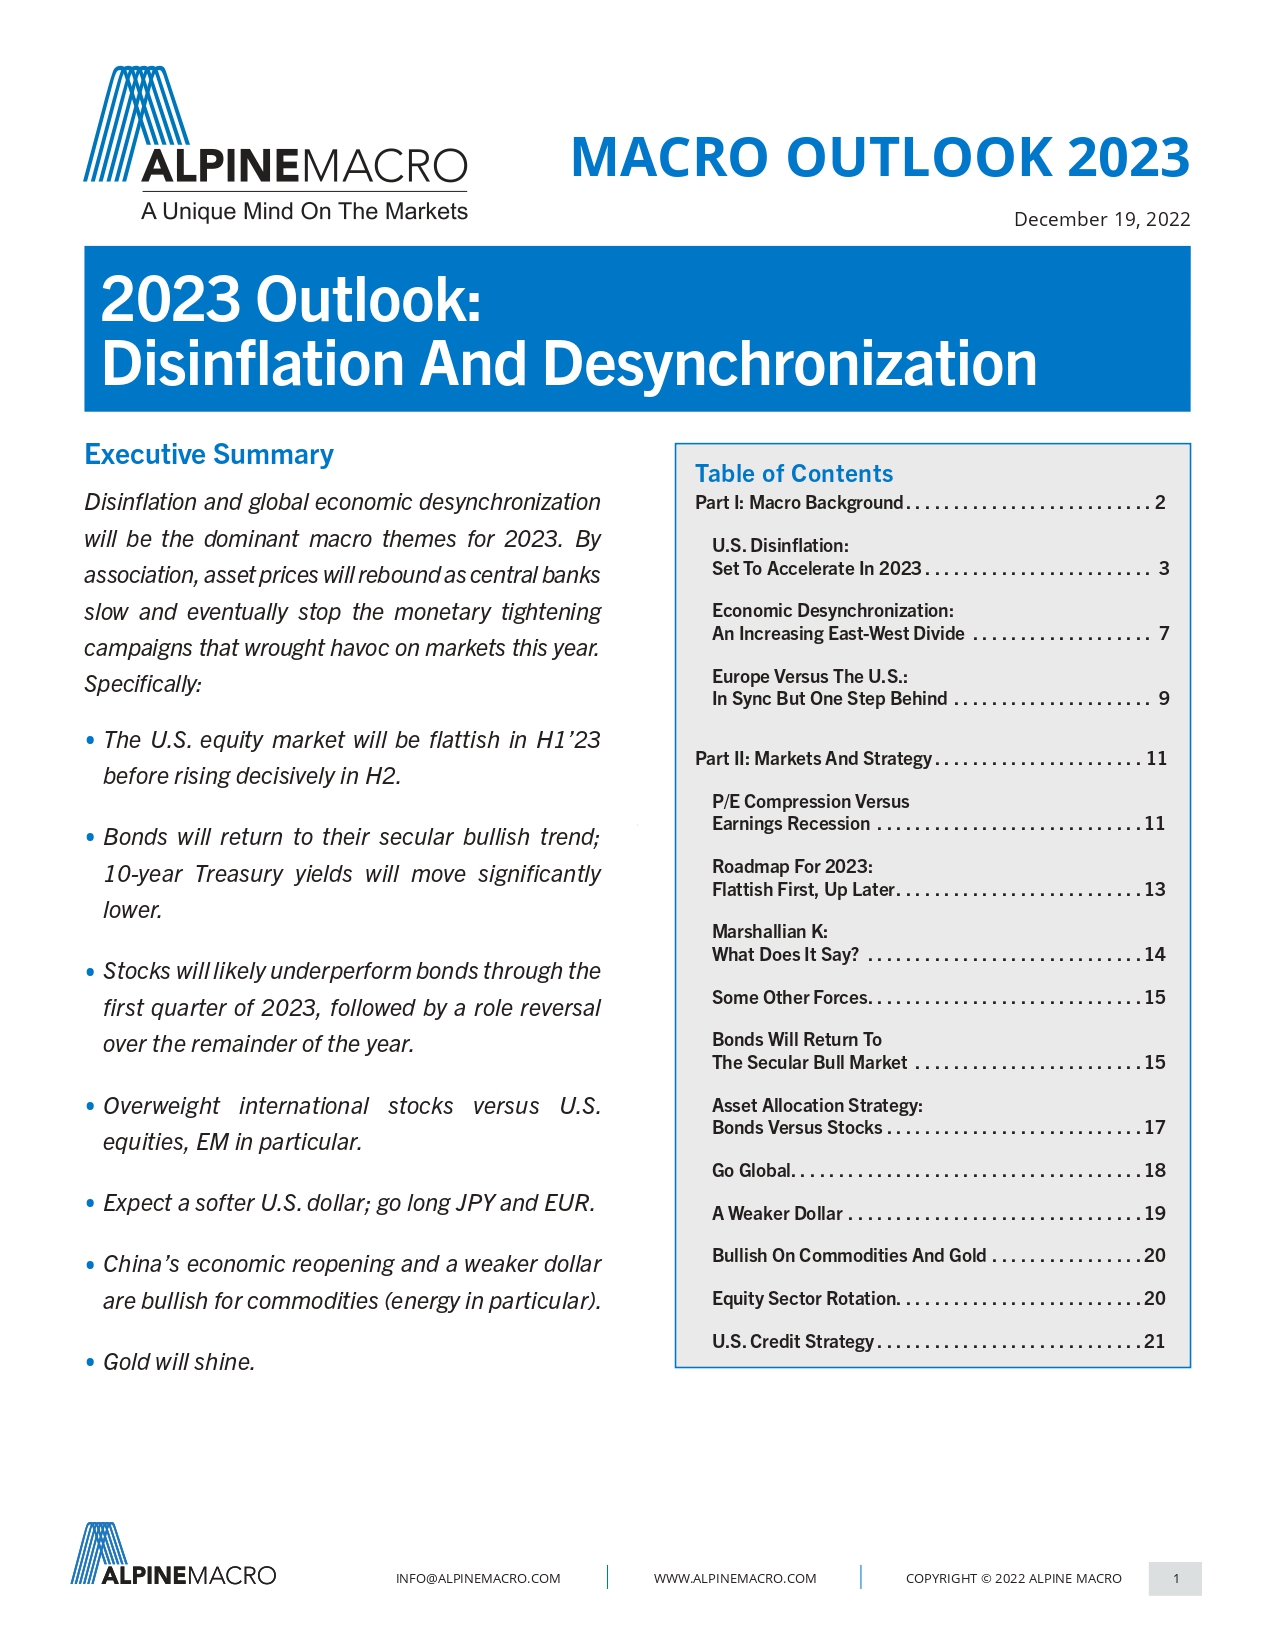 Outlook 2023: Disinflation And Desynchronization